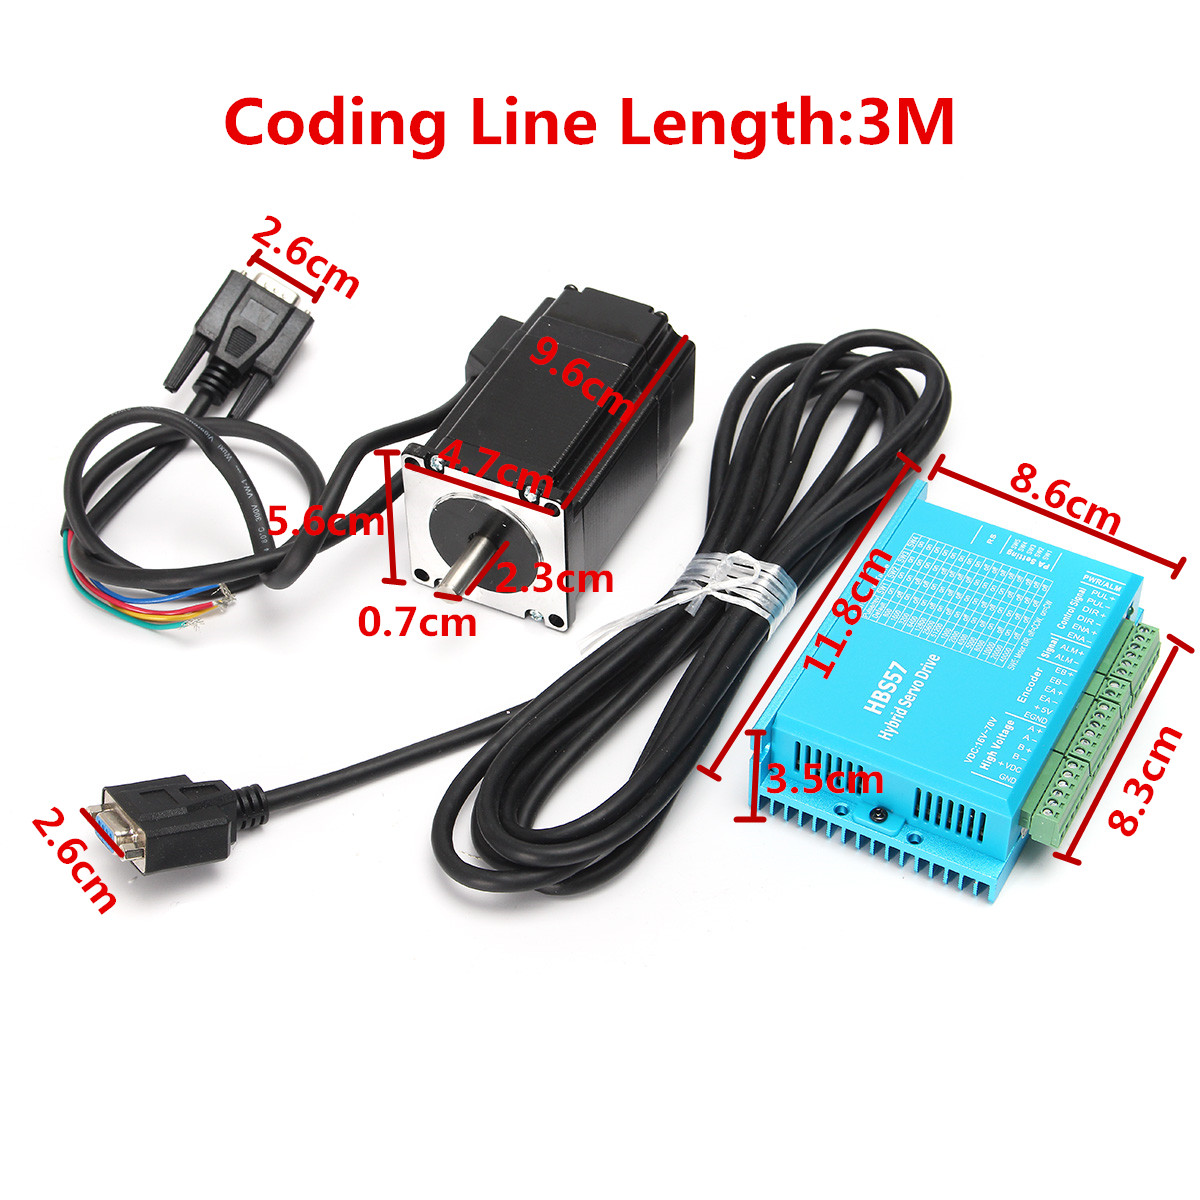 High Speed Closed Loop Stepper Motor + HBS57 Stepper Driver + Coding Cable Kit 4